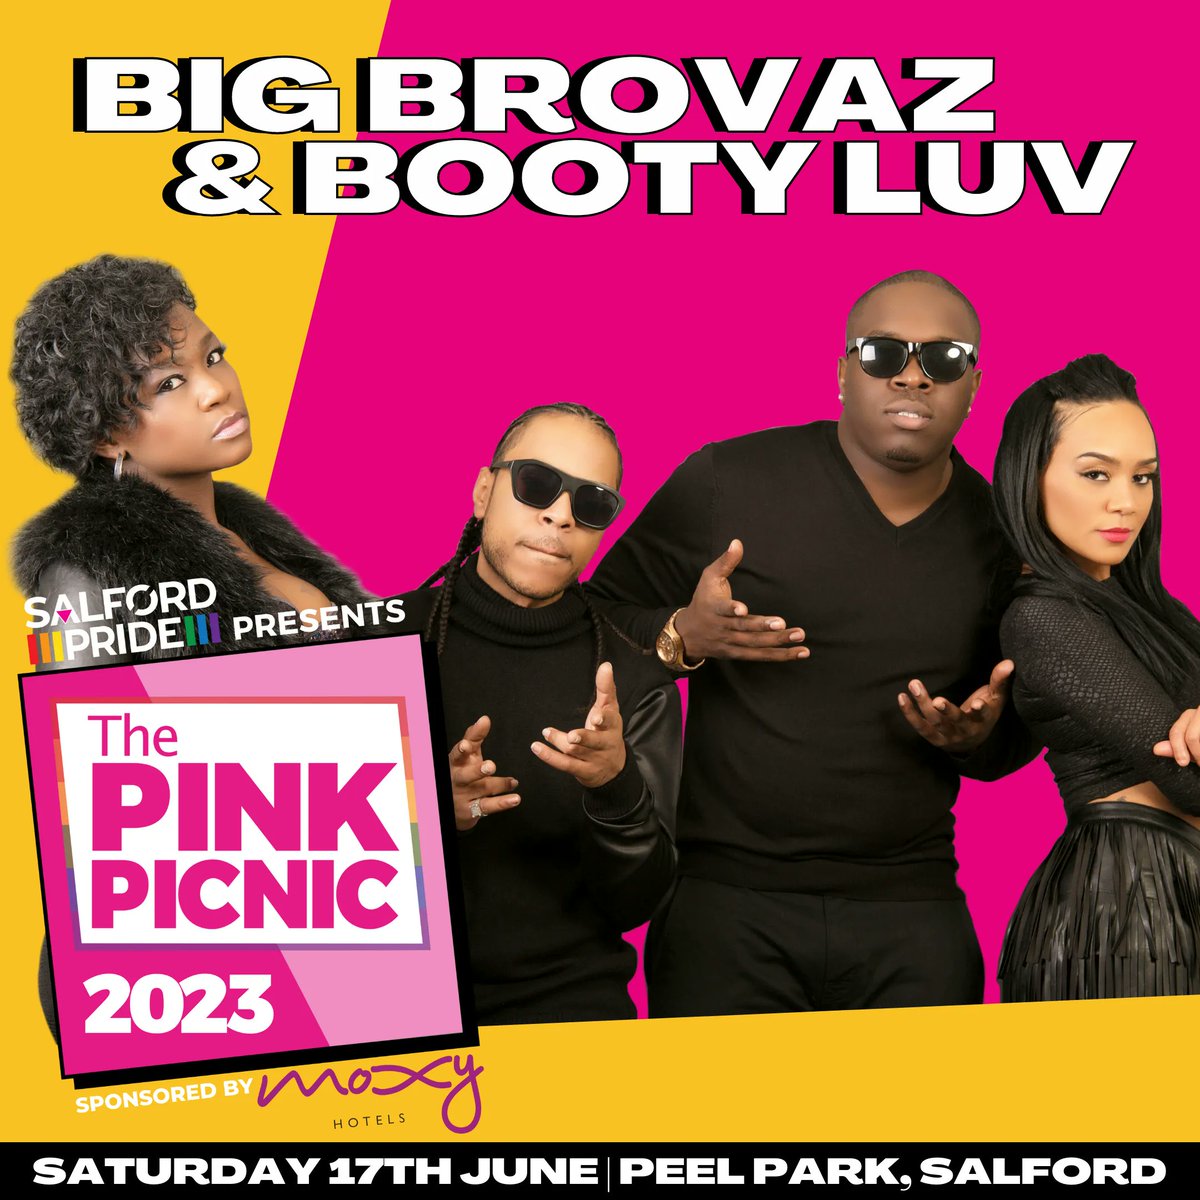 🚨HEADLINER ANNOUNCEMENT🚨DID YOU WANT ANOTHER 🥳 Salford Pride are excited to announce @RealBigBrovaz & @BootyLuv will be joiniing @NadineCoyleNow @iamblackpeppa @baileymills99 and @nimmonimmo headlining The Pink Picnic 2023 🔥 Tickets are available NOW buff.ly/3LL8hmr